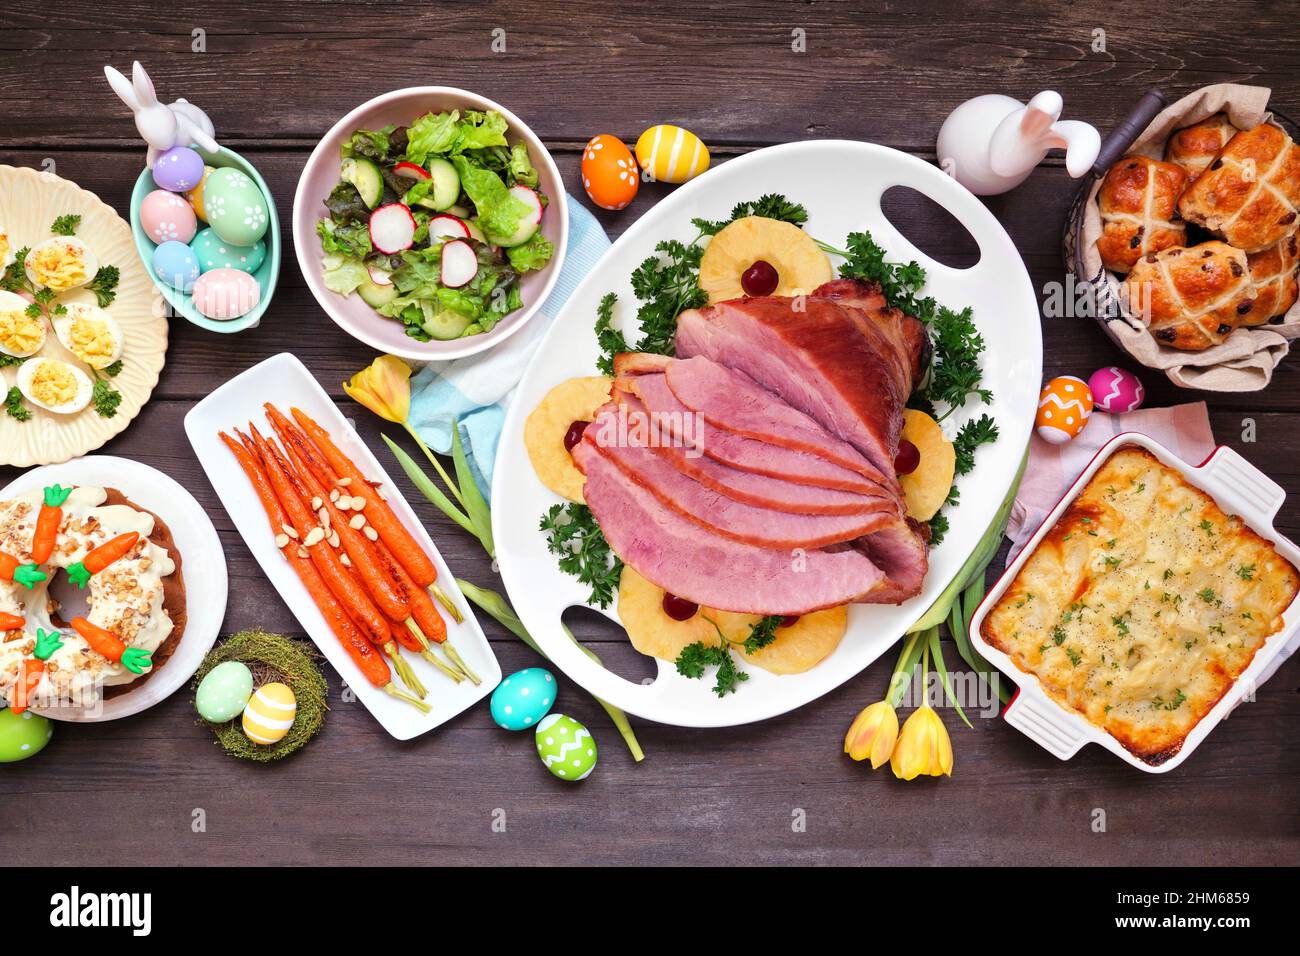 Traditional Easter ham dinner. Top down view table scene on a dark wood background. Ham, scalloped potatoes, vegetables, eggs, hot cross buns and carr Stock Photo